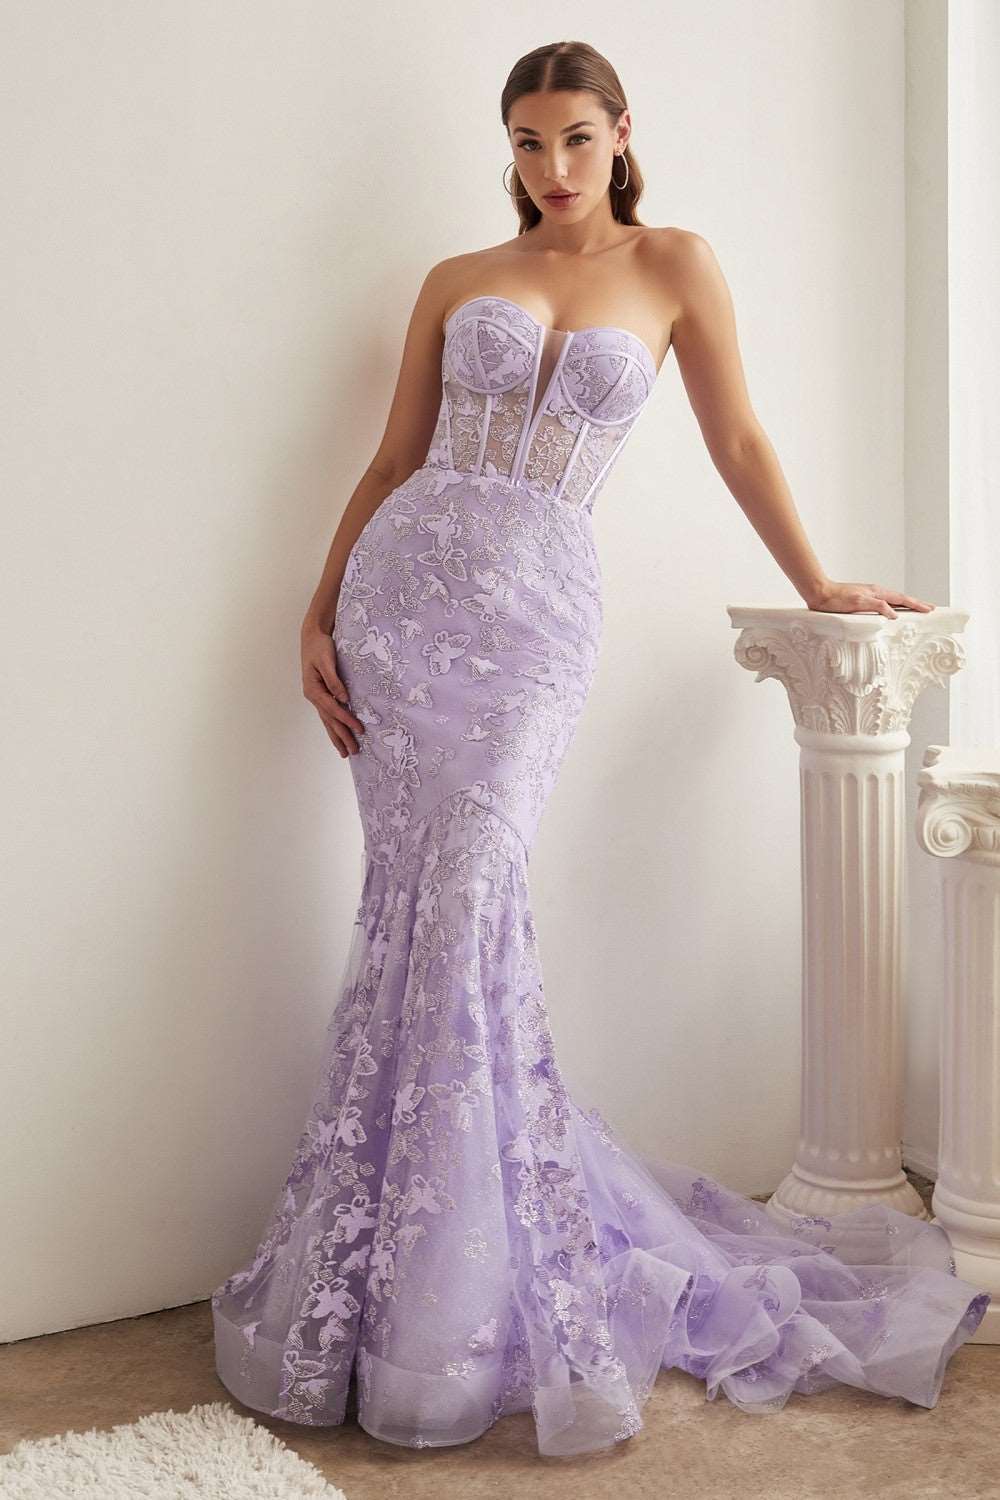 CD CB099 - Strapless Butterfly Print Mermaid Prom Gown with Sheer Boned Bodice PROM GOWN Cinderella Divine 2 LAVENDER 